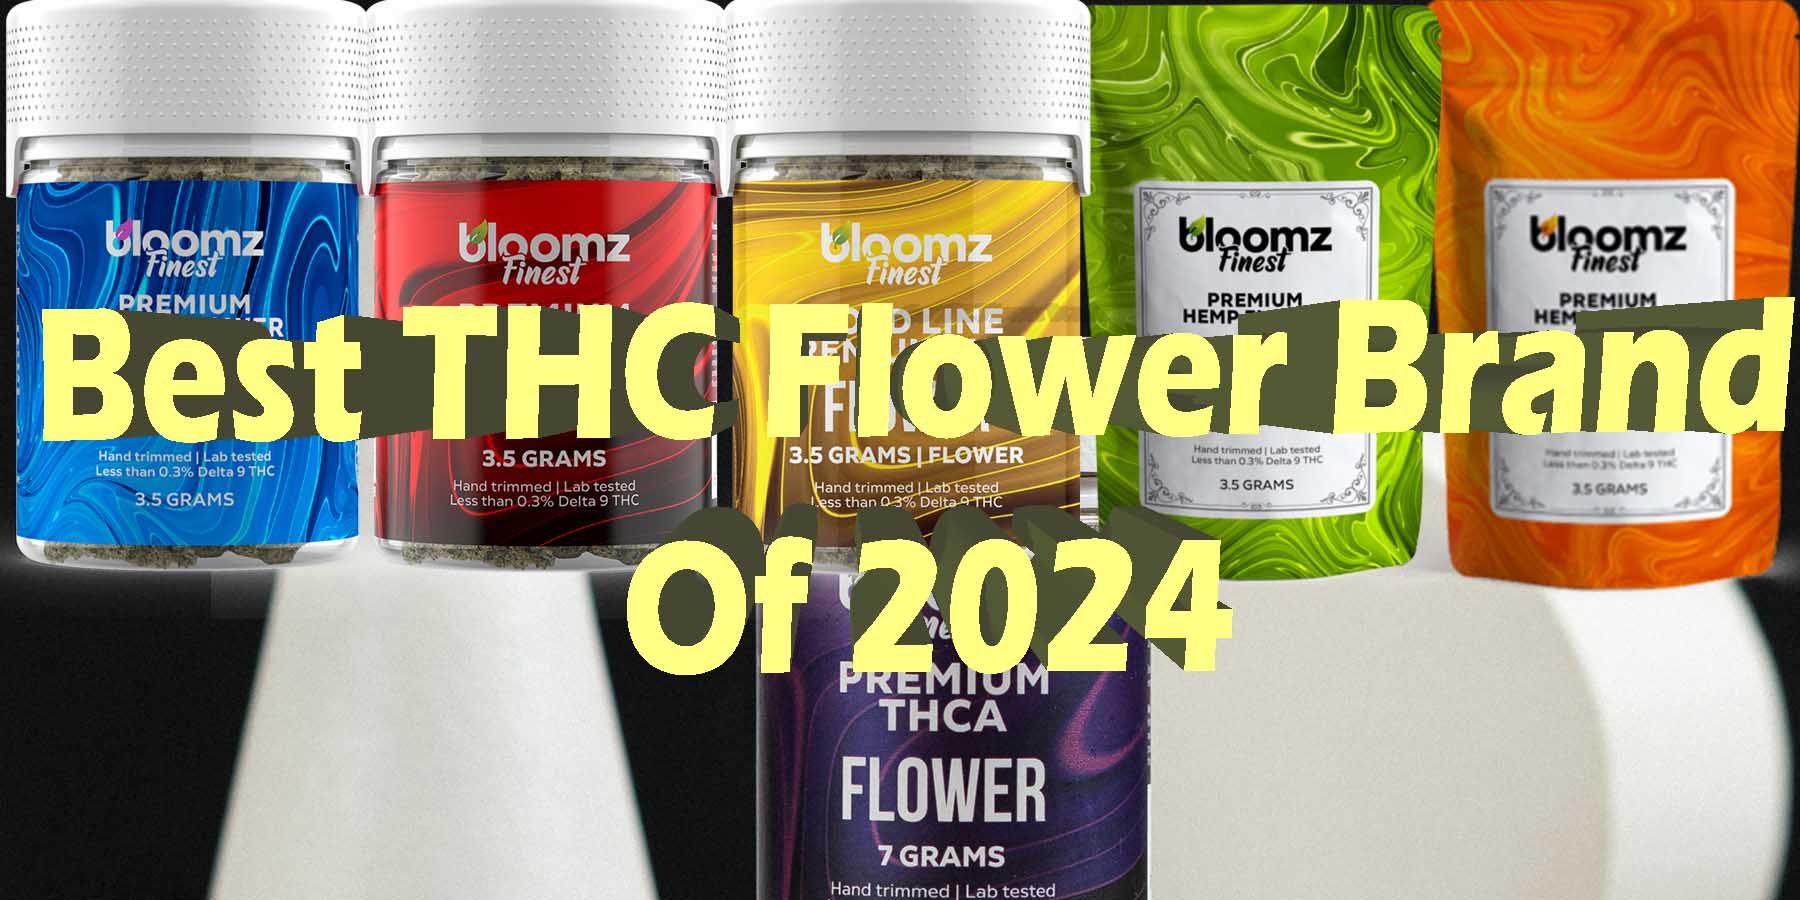 Best THC Flower Brand of 2024 WhereToGet HowToGetNearMe BestPlace LowestPrice Coupon Discount For Smoking Best High Smoke Shop Online Near Me StrongestBrand BestBrand.